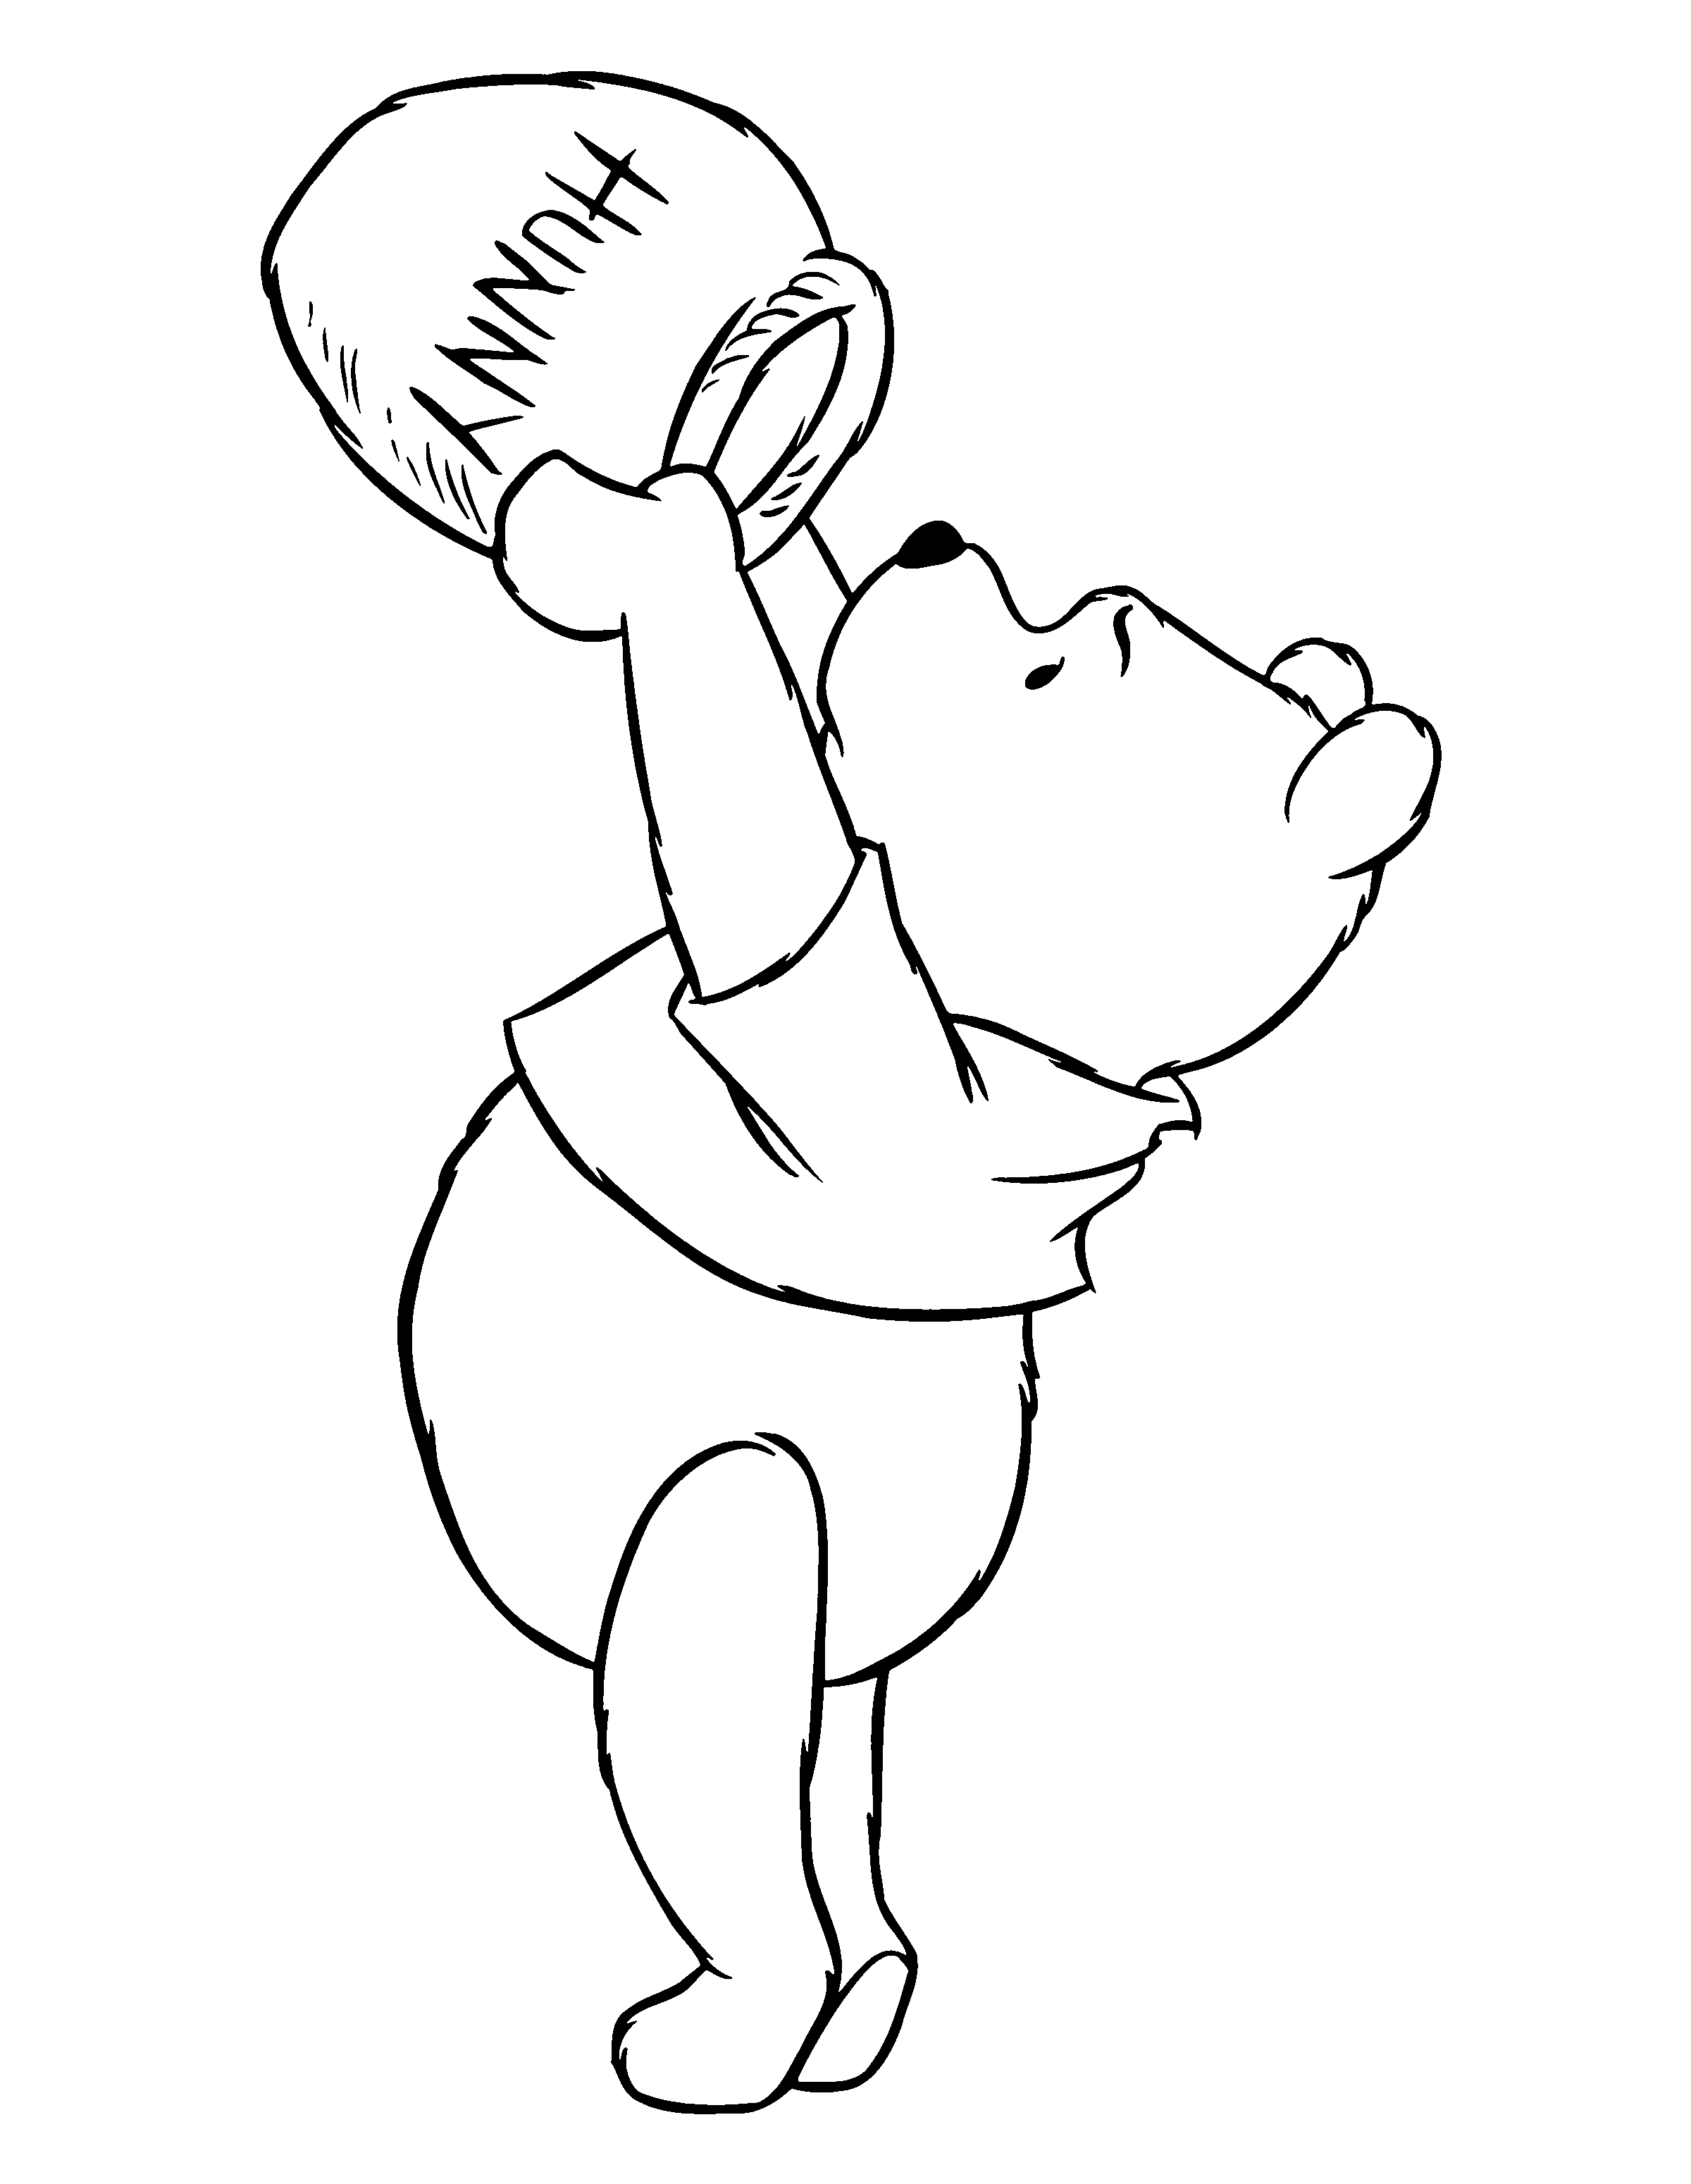 Coloring Page - Winnie the pooh coloring pages 56